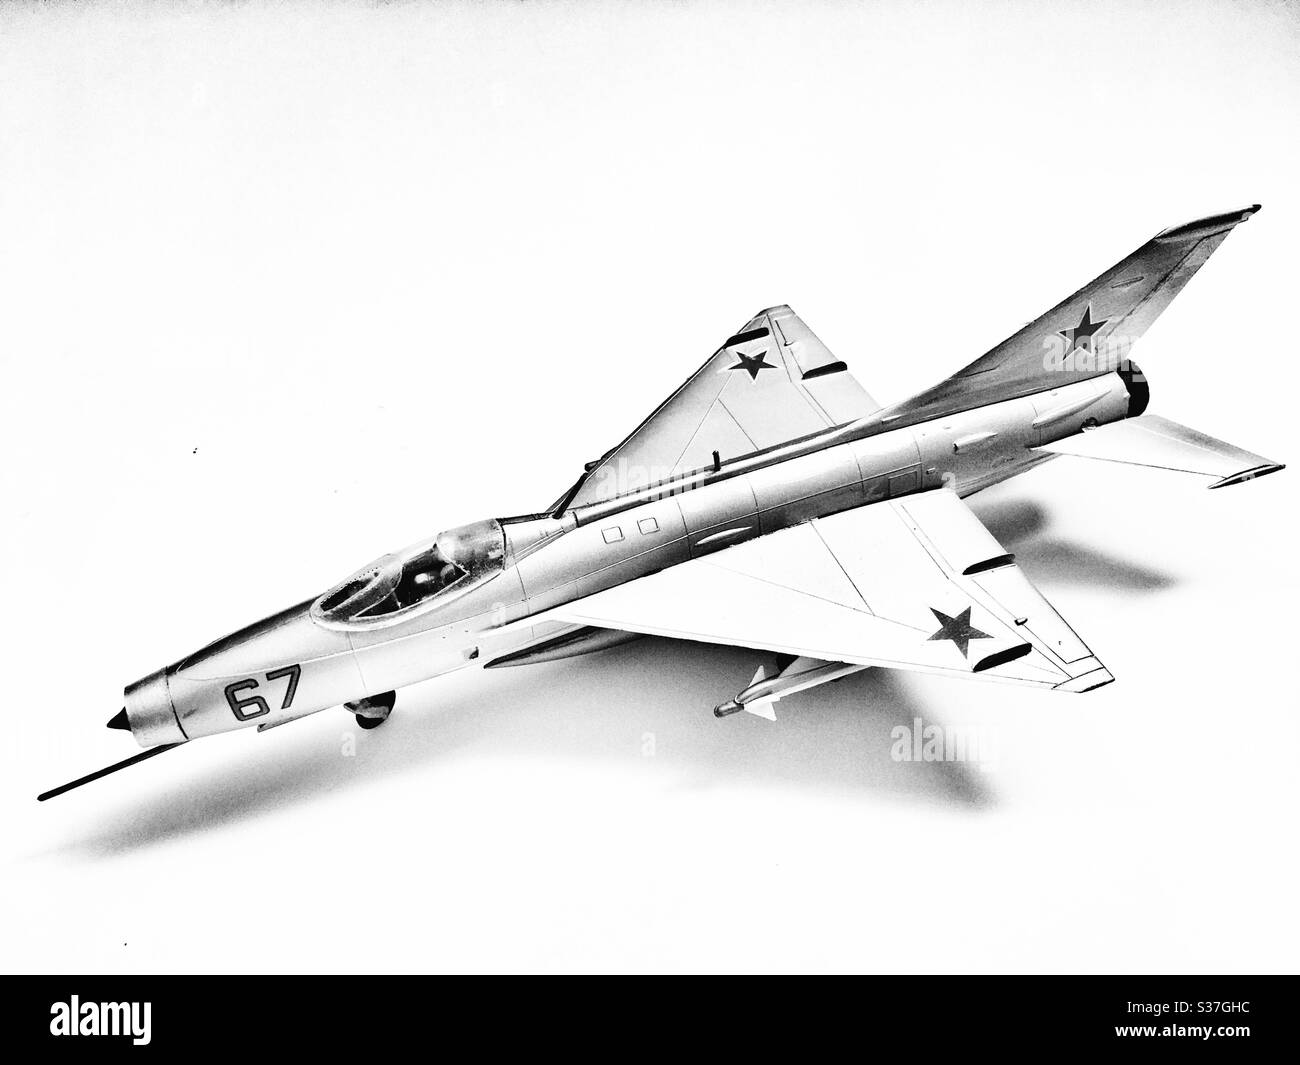 Mig 21 Fishbed 1/72 scale model aircraft Stock Photo